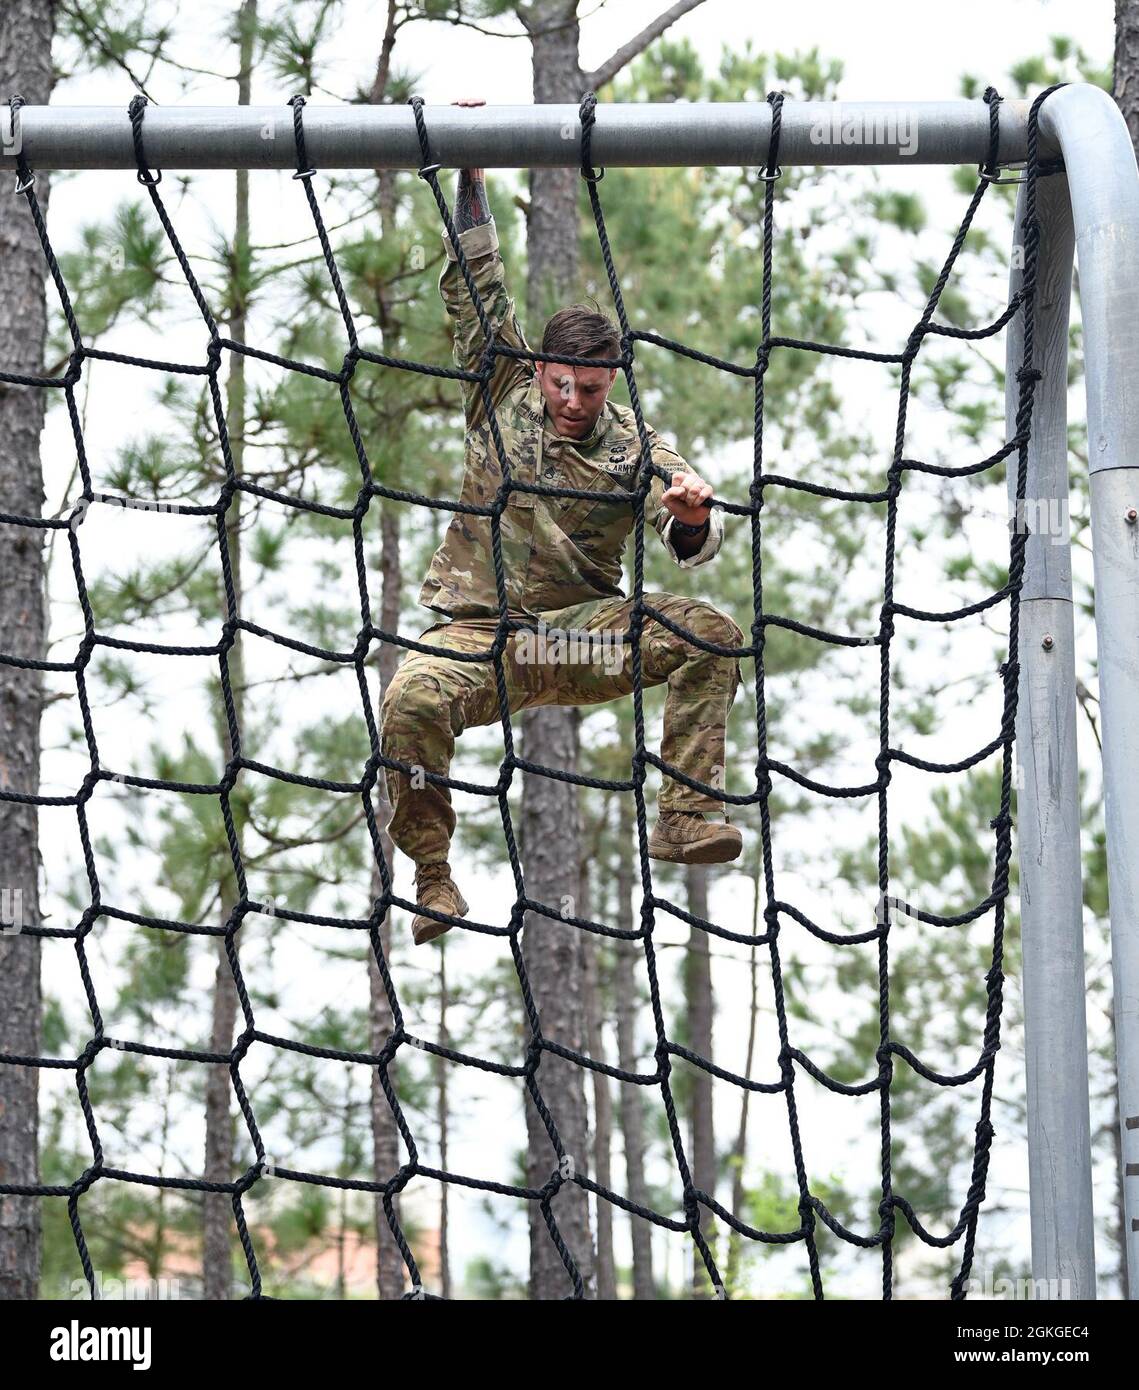 A Soldier from Support Battalion, 1st Special Warfare Training Group (Airborne) climbs a cargo net during the battalion's Commander's Cup competition at Fort Bragg, North Carolina April 15, 2021. The Soldiers from each company competed in a ruck march, obstacle course, land navigation, Jeopardy-themed trivia contest and stress shoot with pistols and rifles. Stock Photo